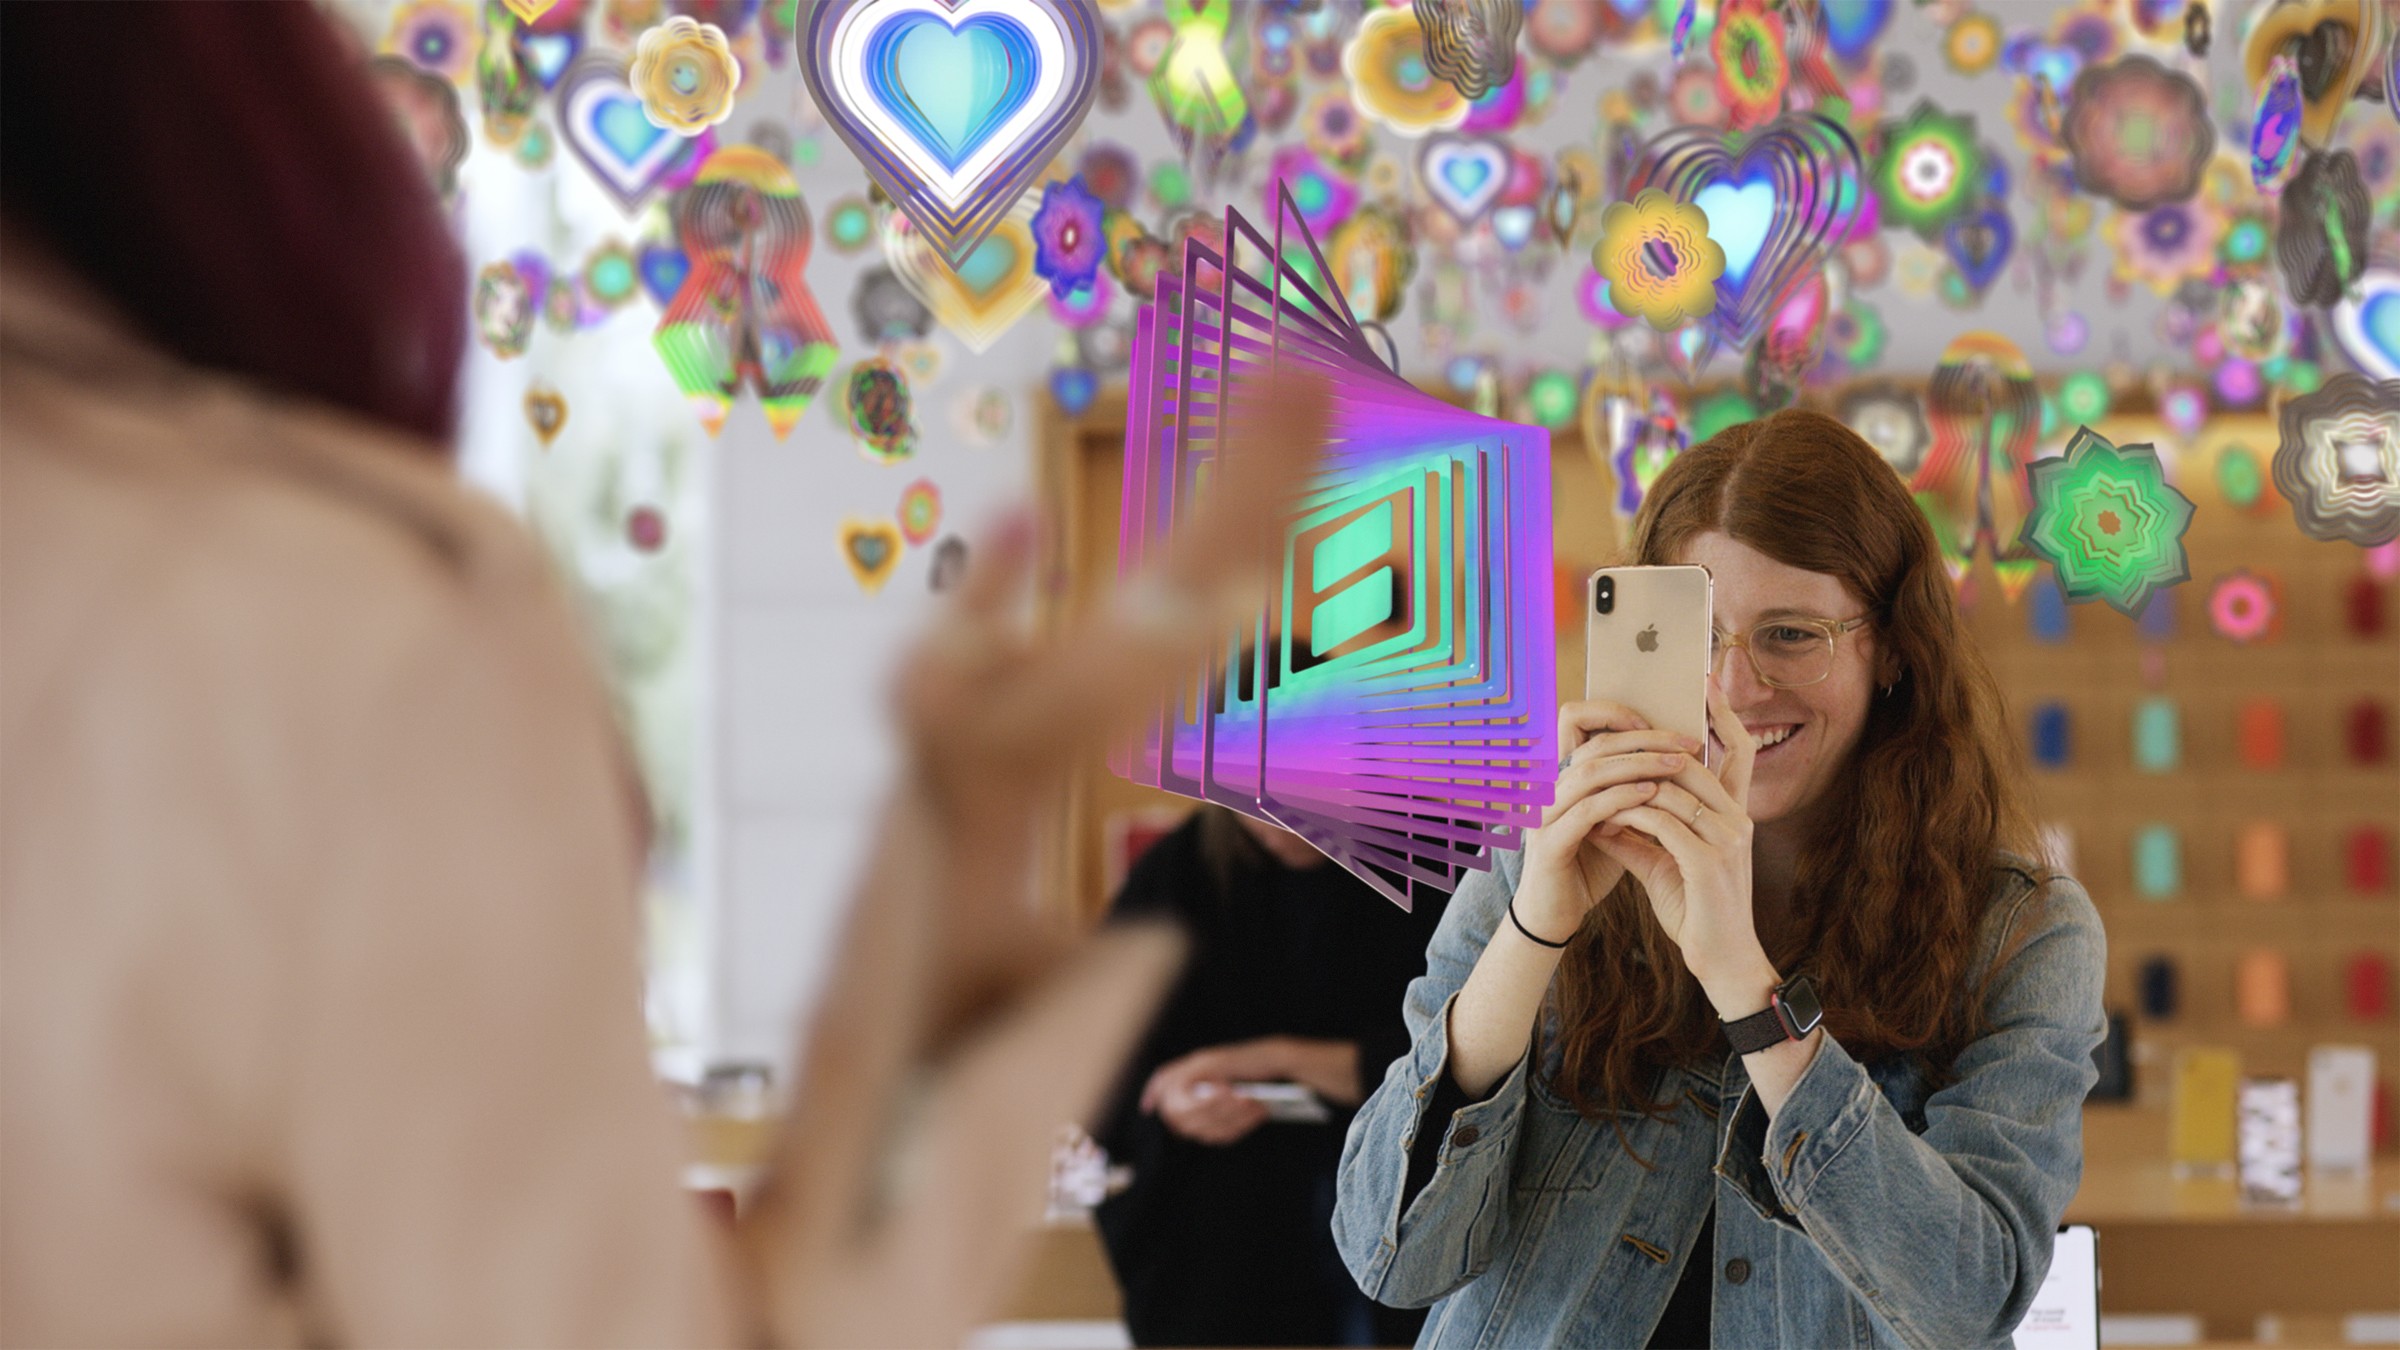 Screen capture of Nick Cave's Amass, an augmented reality work that members of the public can experience in Apple stores worldwide from August 10. It is presented to coincide with the launch of AR art walks in six cities, including Hong Kong.